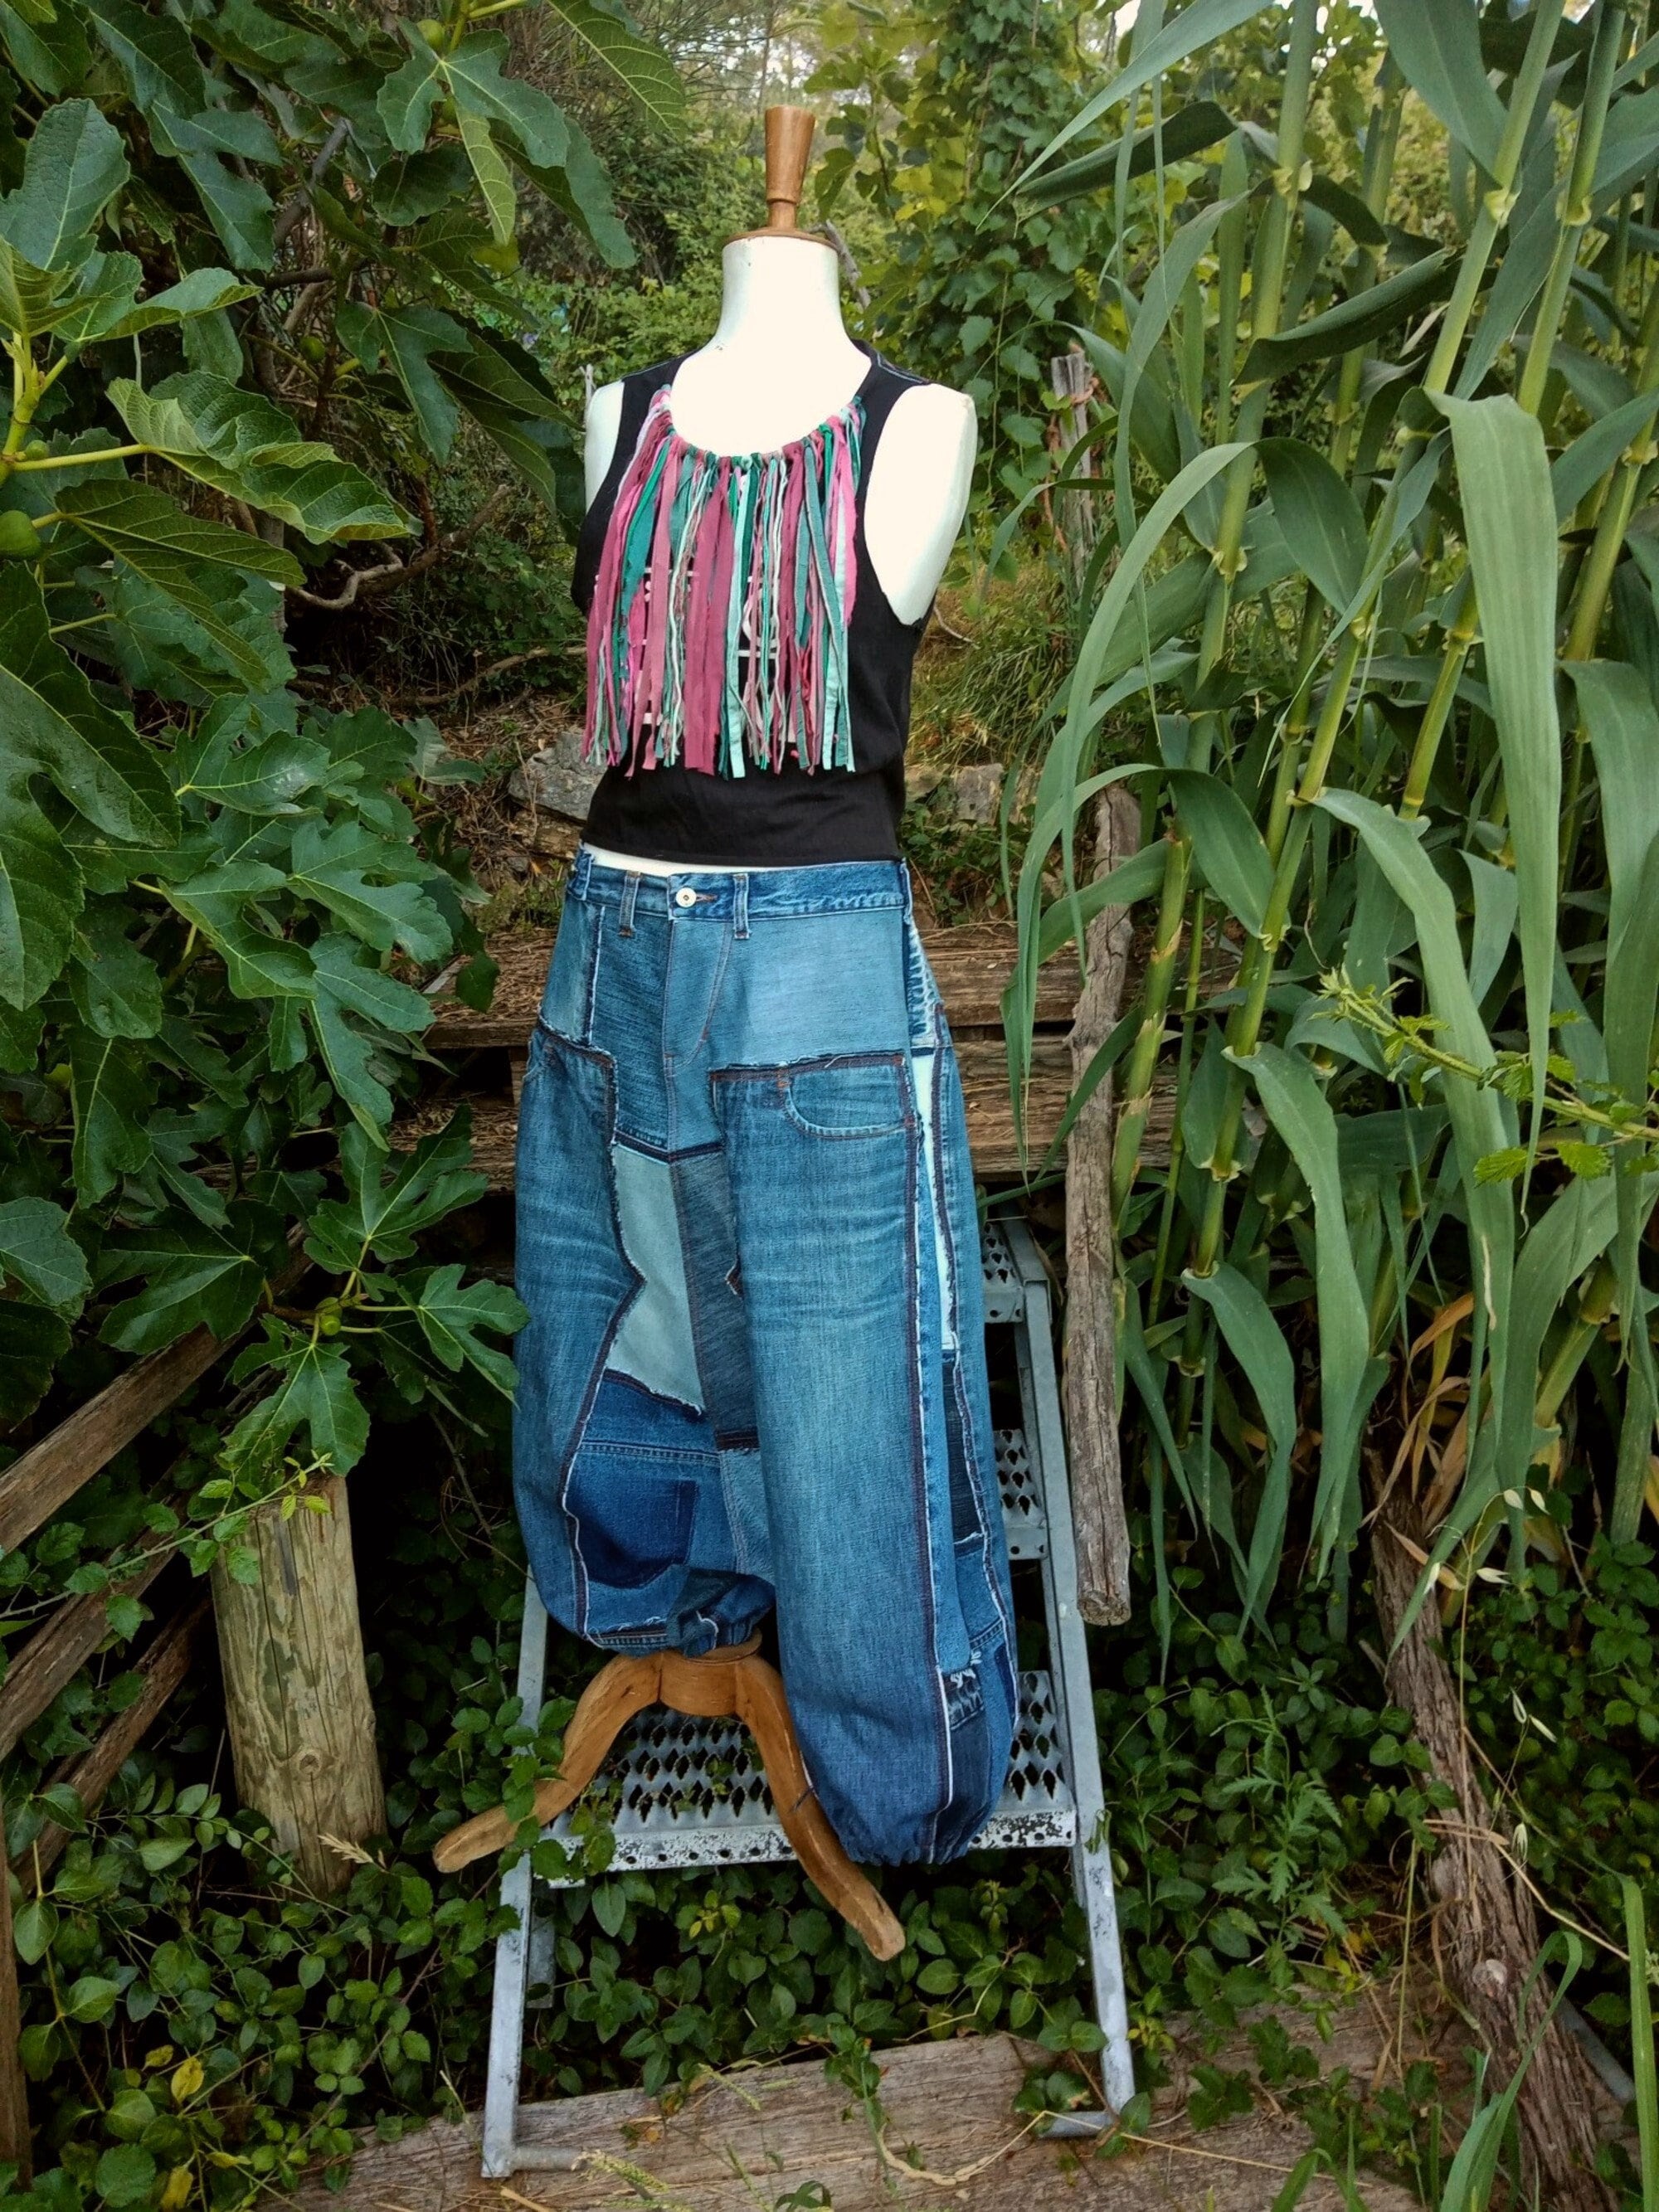 IV. How to Upcycle and Customize Overalls